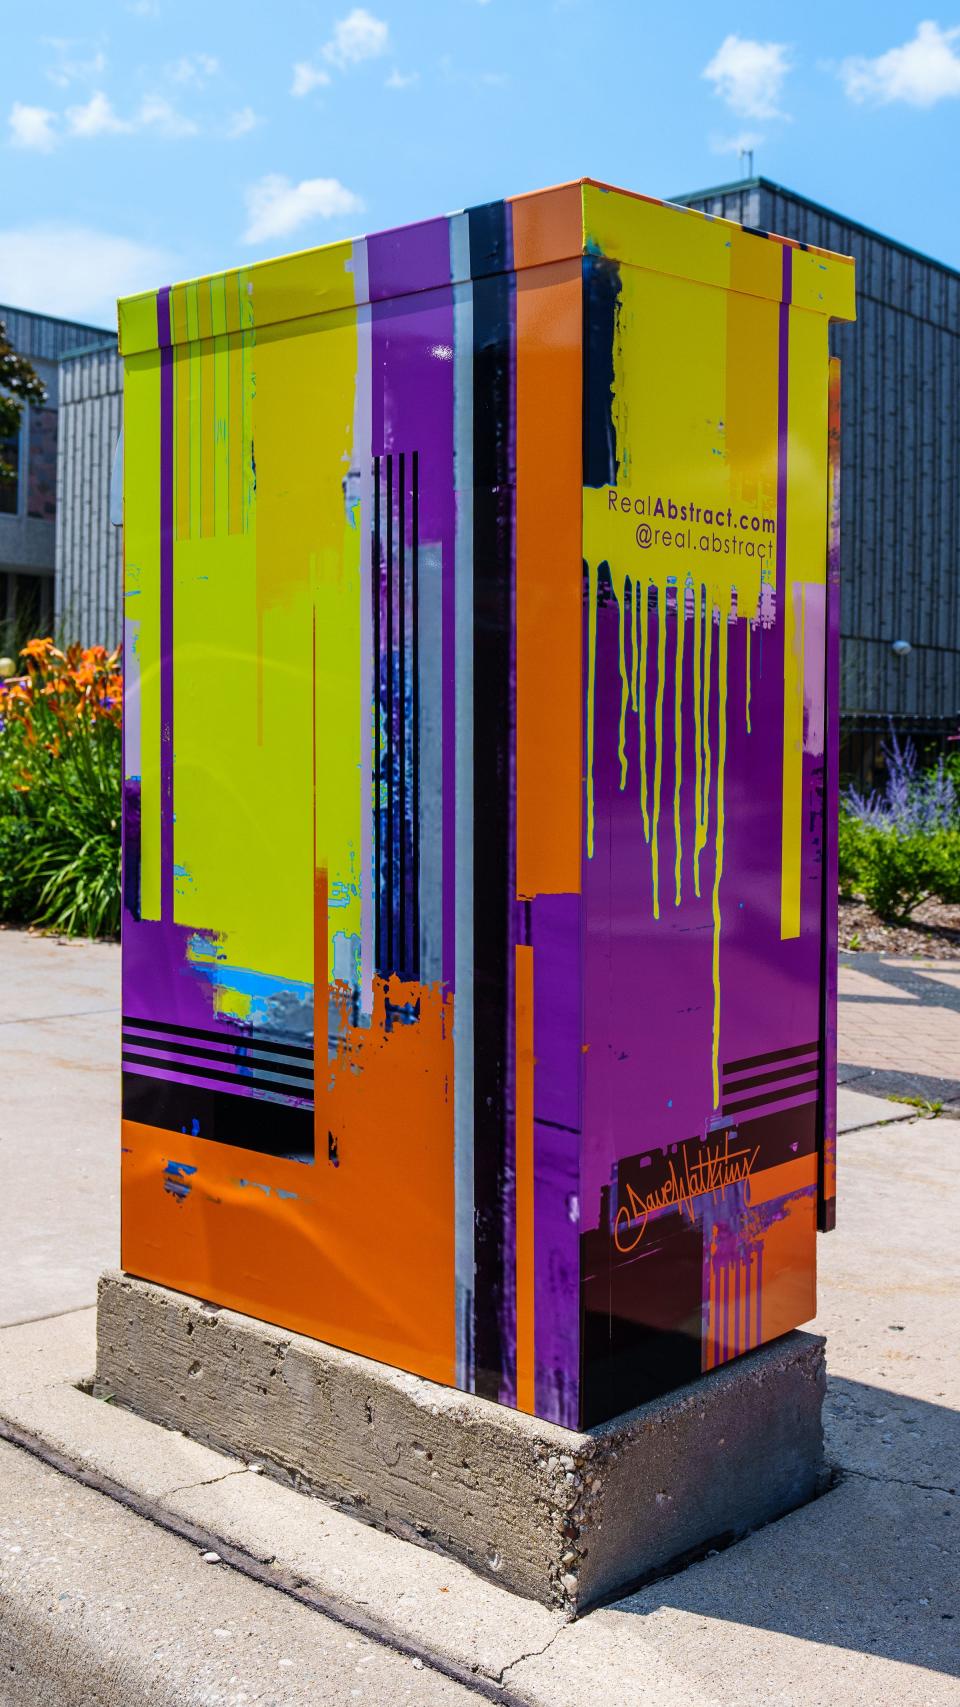 A utility box at 75th & Greenfield is wrapped with art by Dave Watkins as seen on Friday, July 21, 2023. The box is one of 11 selected for the City of West Allis public art utility box program.